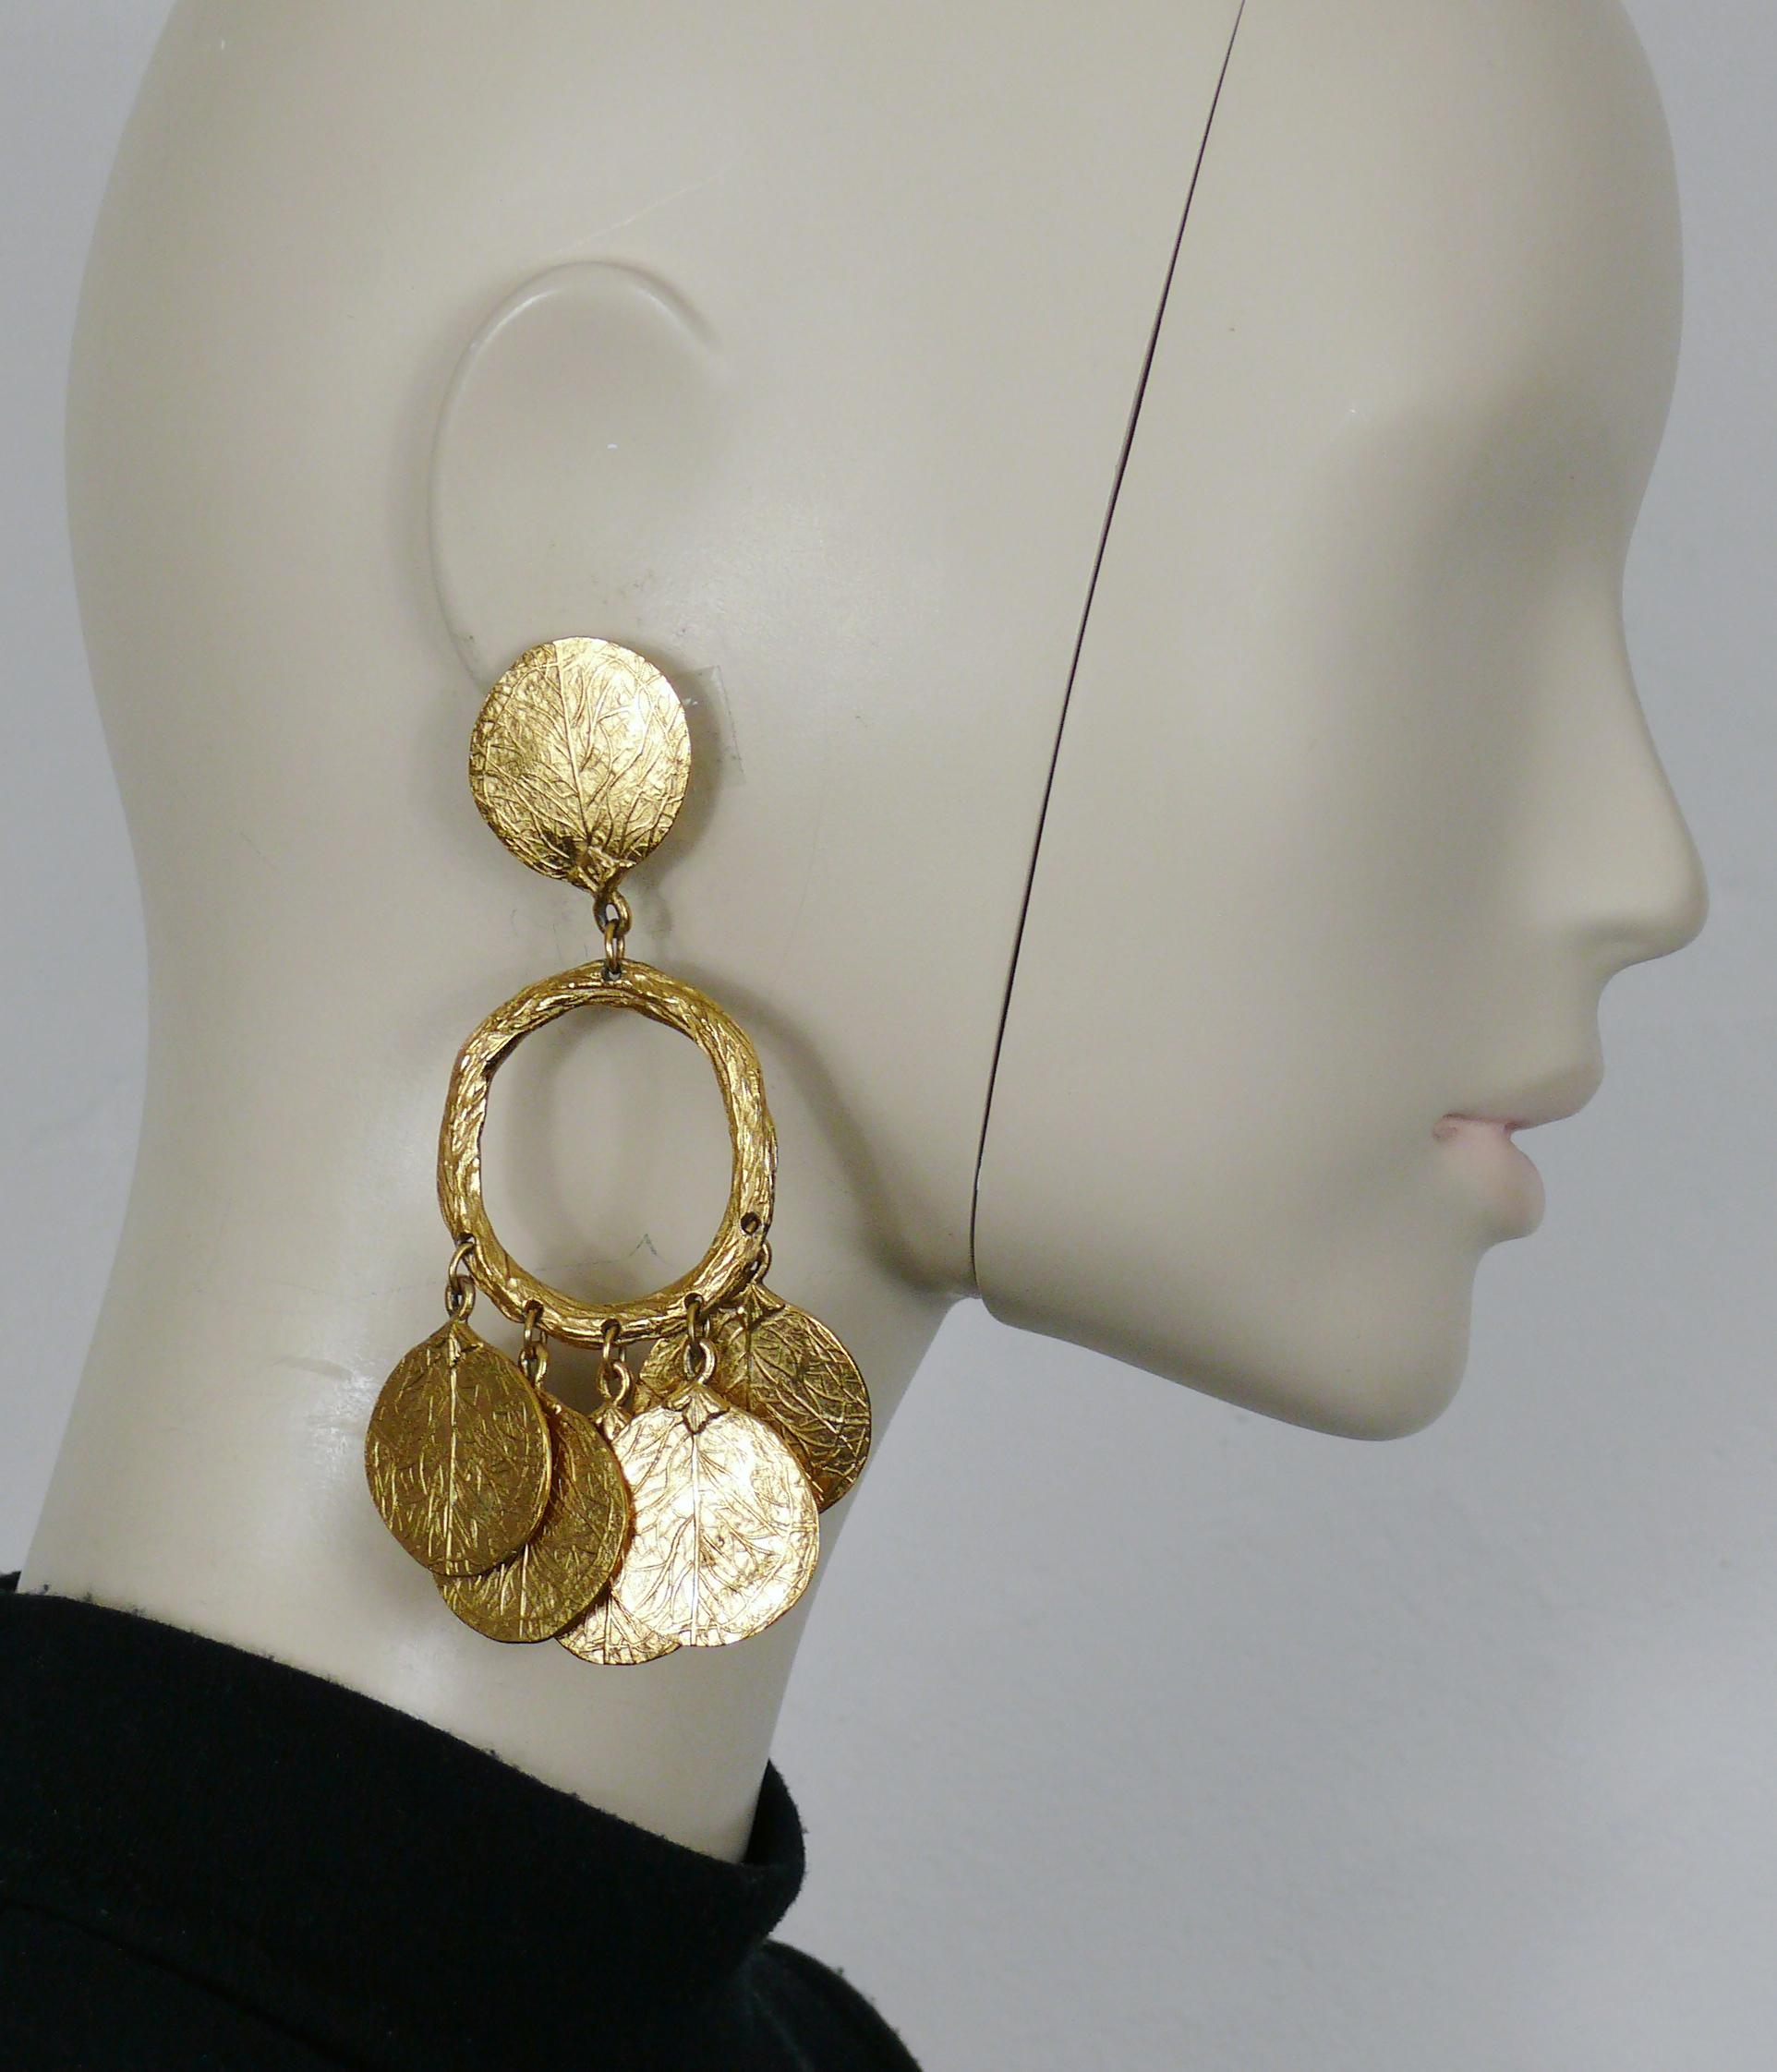 CHARLES JOURDAN vintage textured gold tone dangling earrings (clip-on) featuring leaf print charms.

Embossed CHARLES JOURDAN Paris.

Indicative measurements : height approx. 11 cm (4.33 inches) / max. width approx. 6.5 cm (2.56 inches).

Weight per